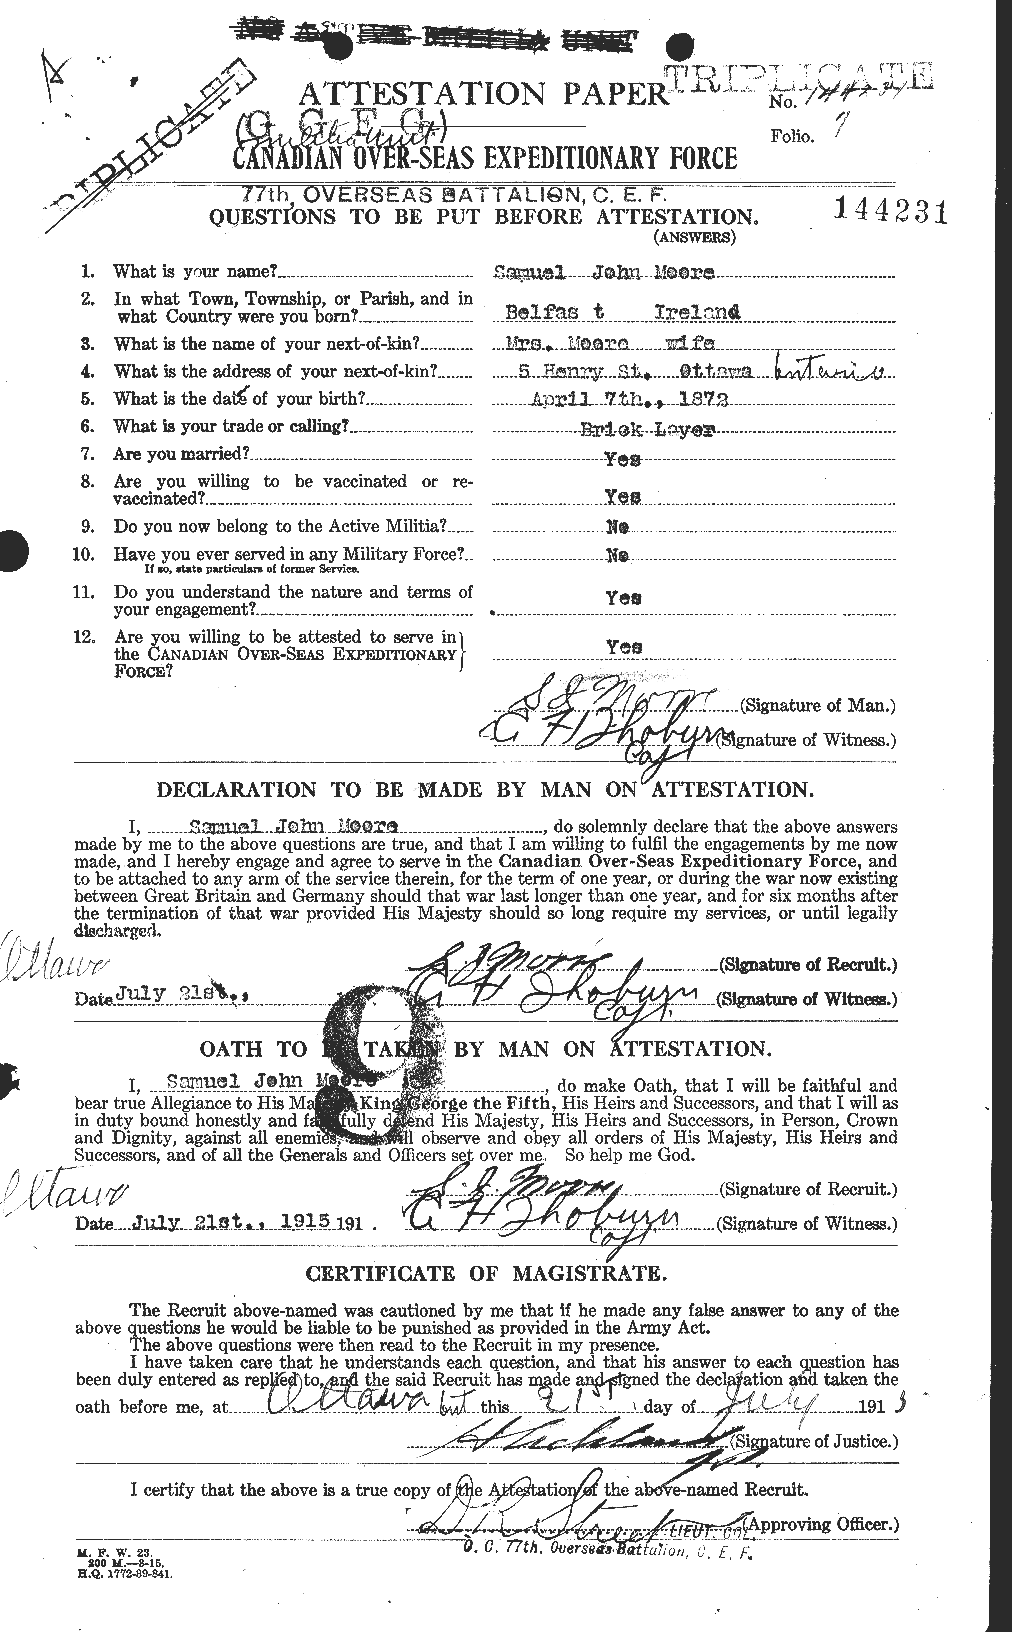 Personnel Records of the First World War - CEF 505569a